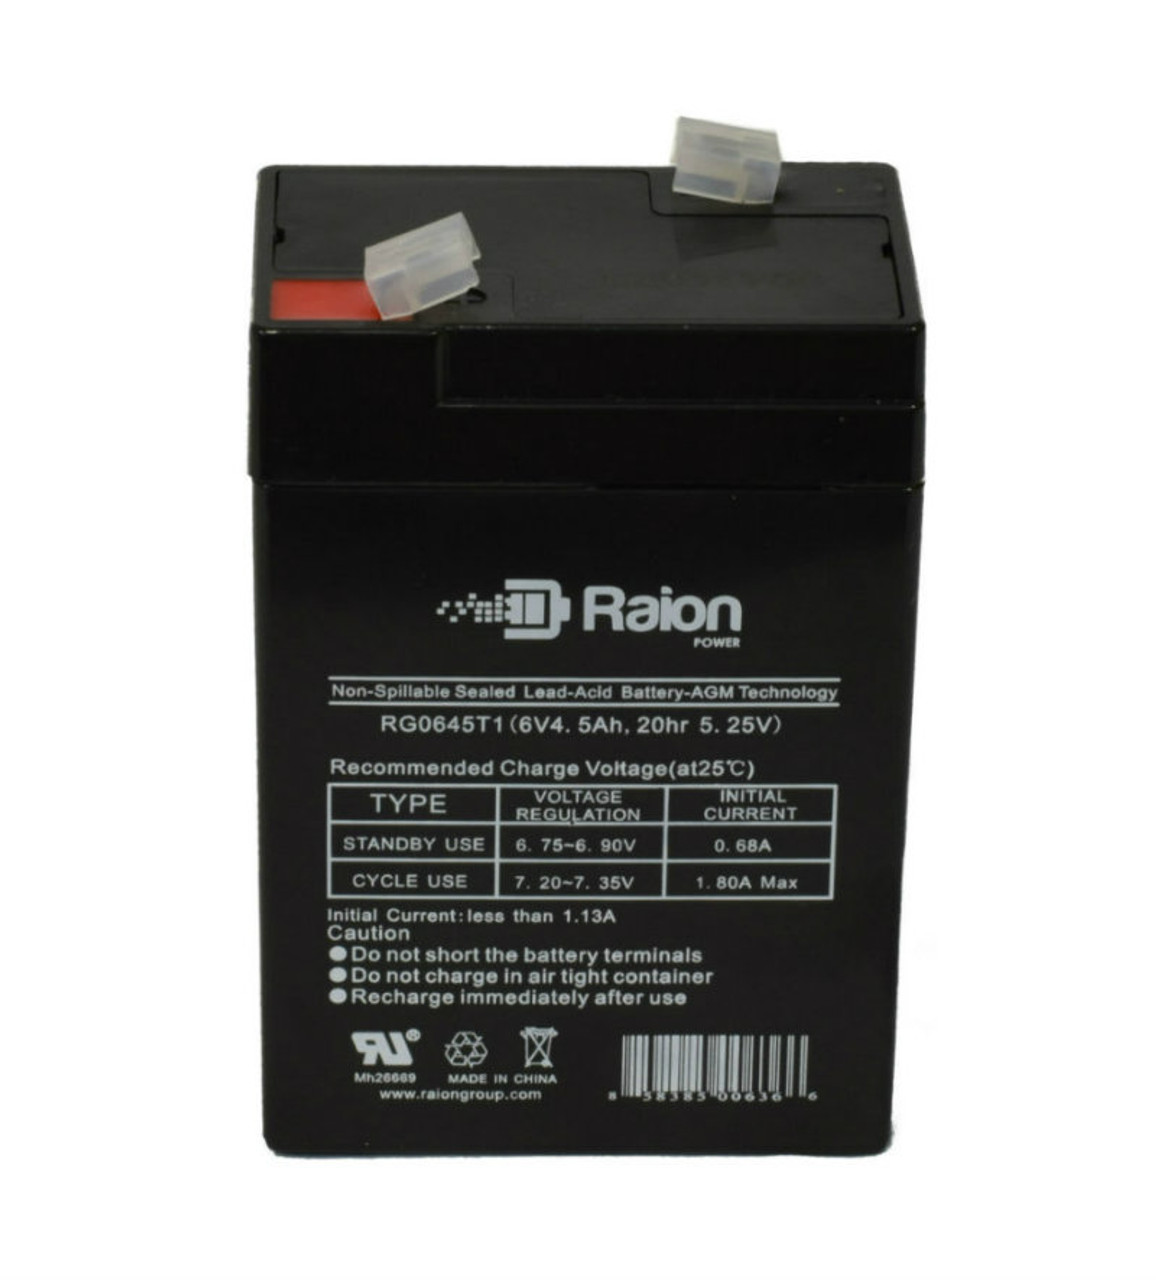 Raion Power RG0645T1 Replacement Battery Cartridge for Emergi-Lite BSMX14R